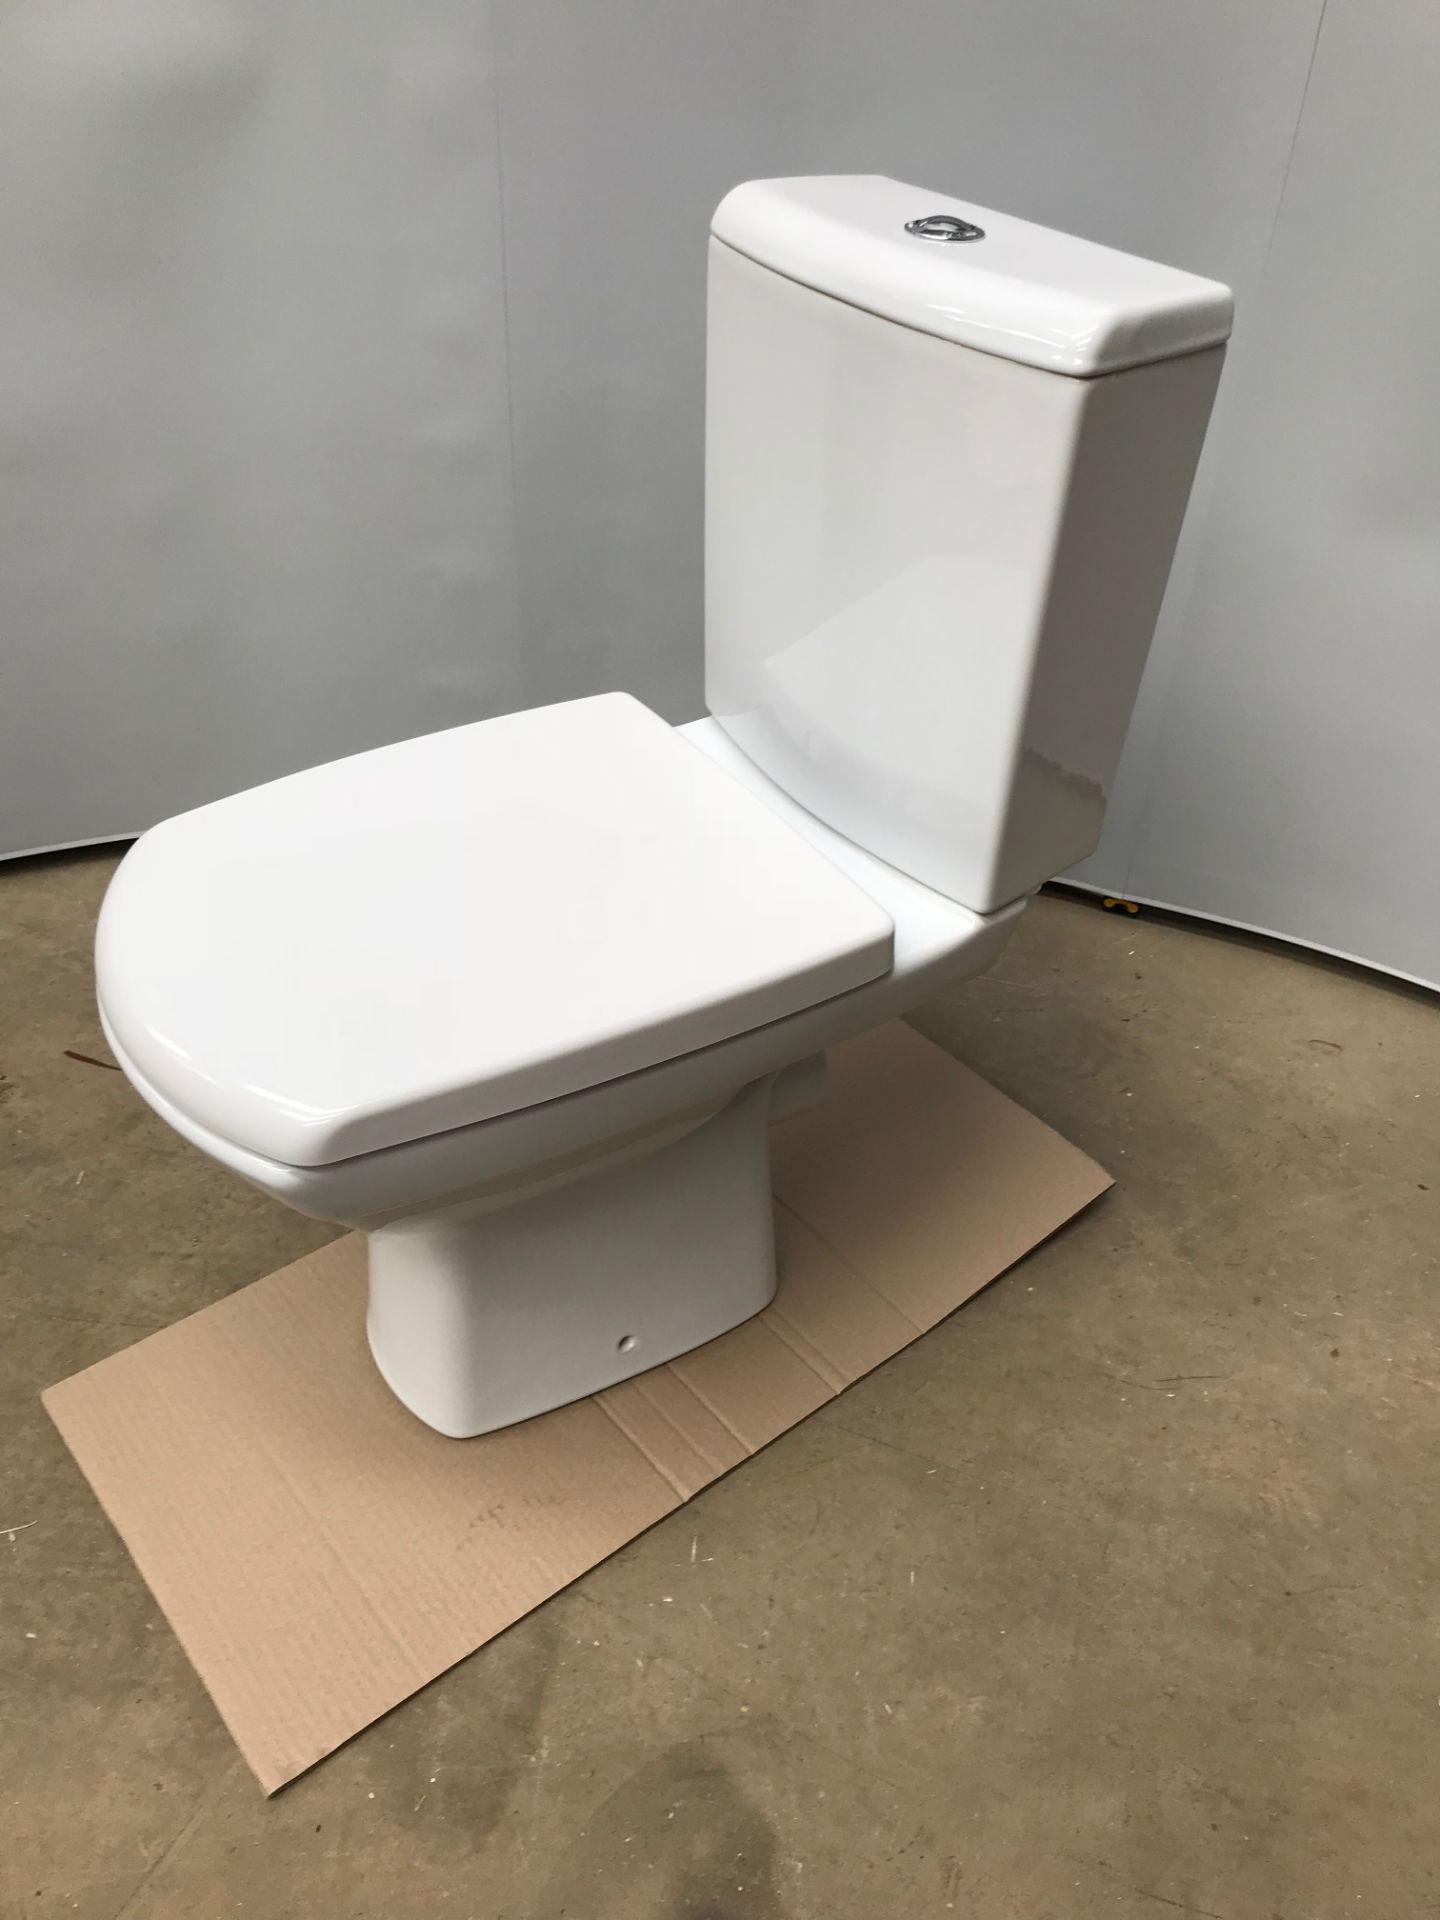 1 x Navassa Close Coupled Toilet with Soft Closing Seat - Image 5 of 7